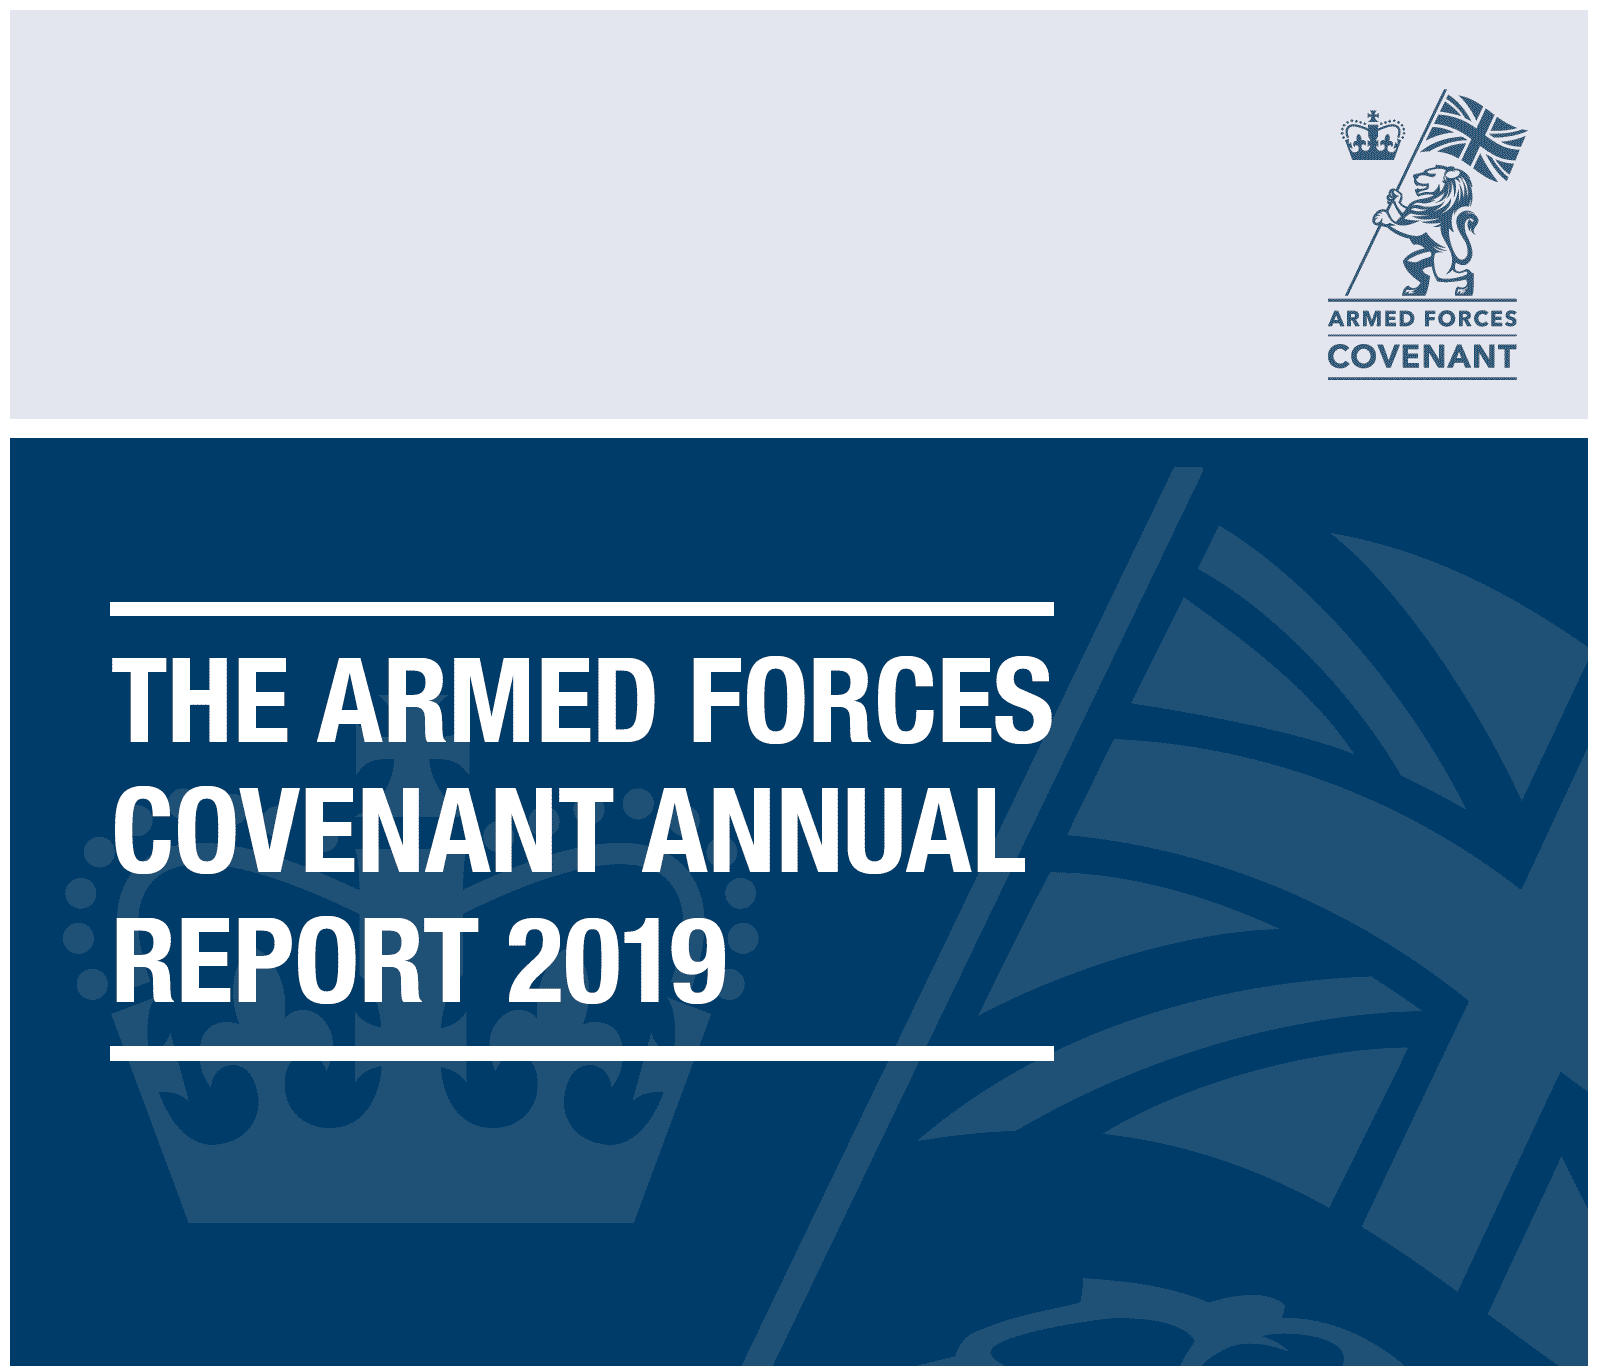 The Armed Forces Covenant Annual Report 2019 graphic